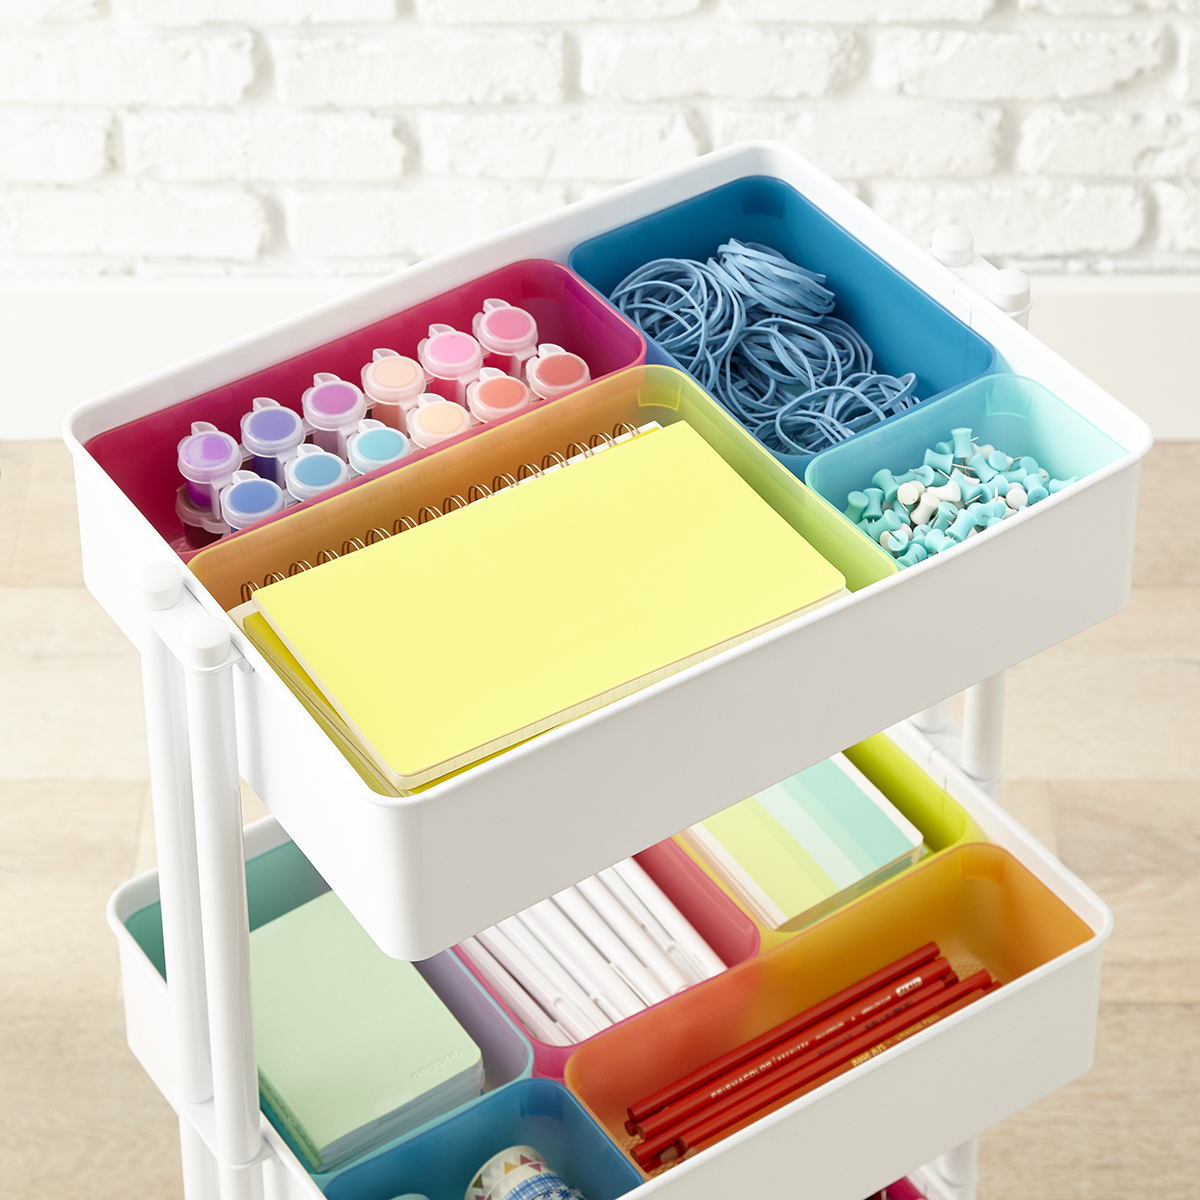 The Container Store 3-Tier Cart Ribbon Holder